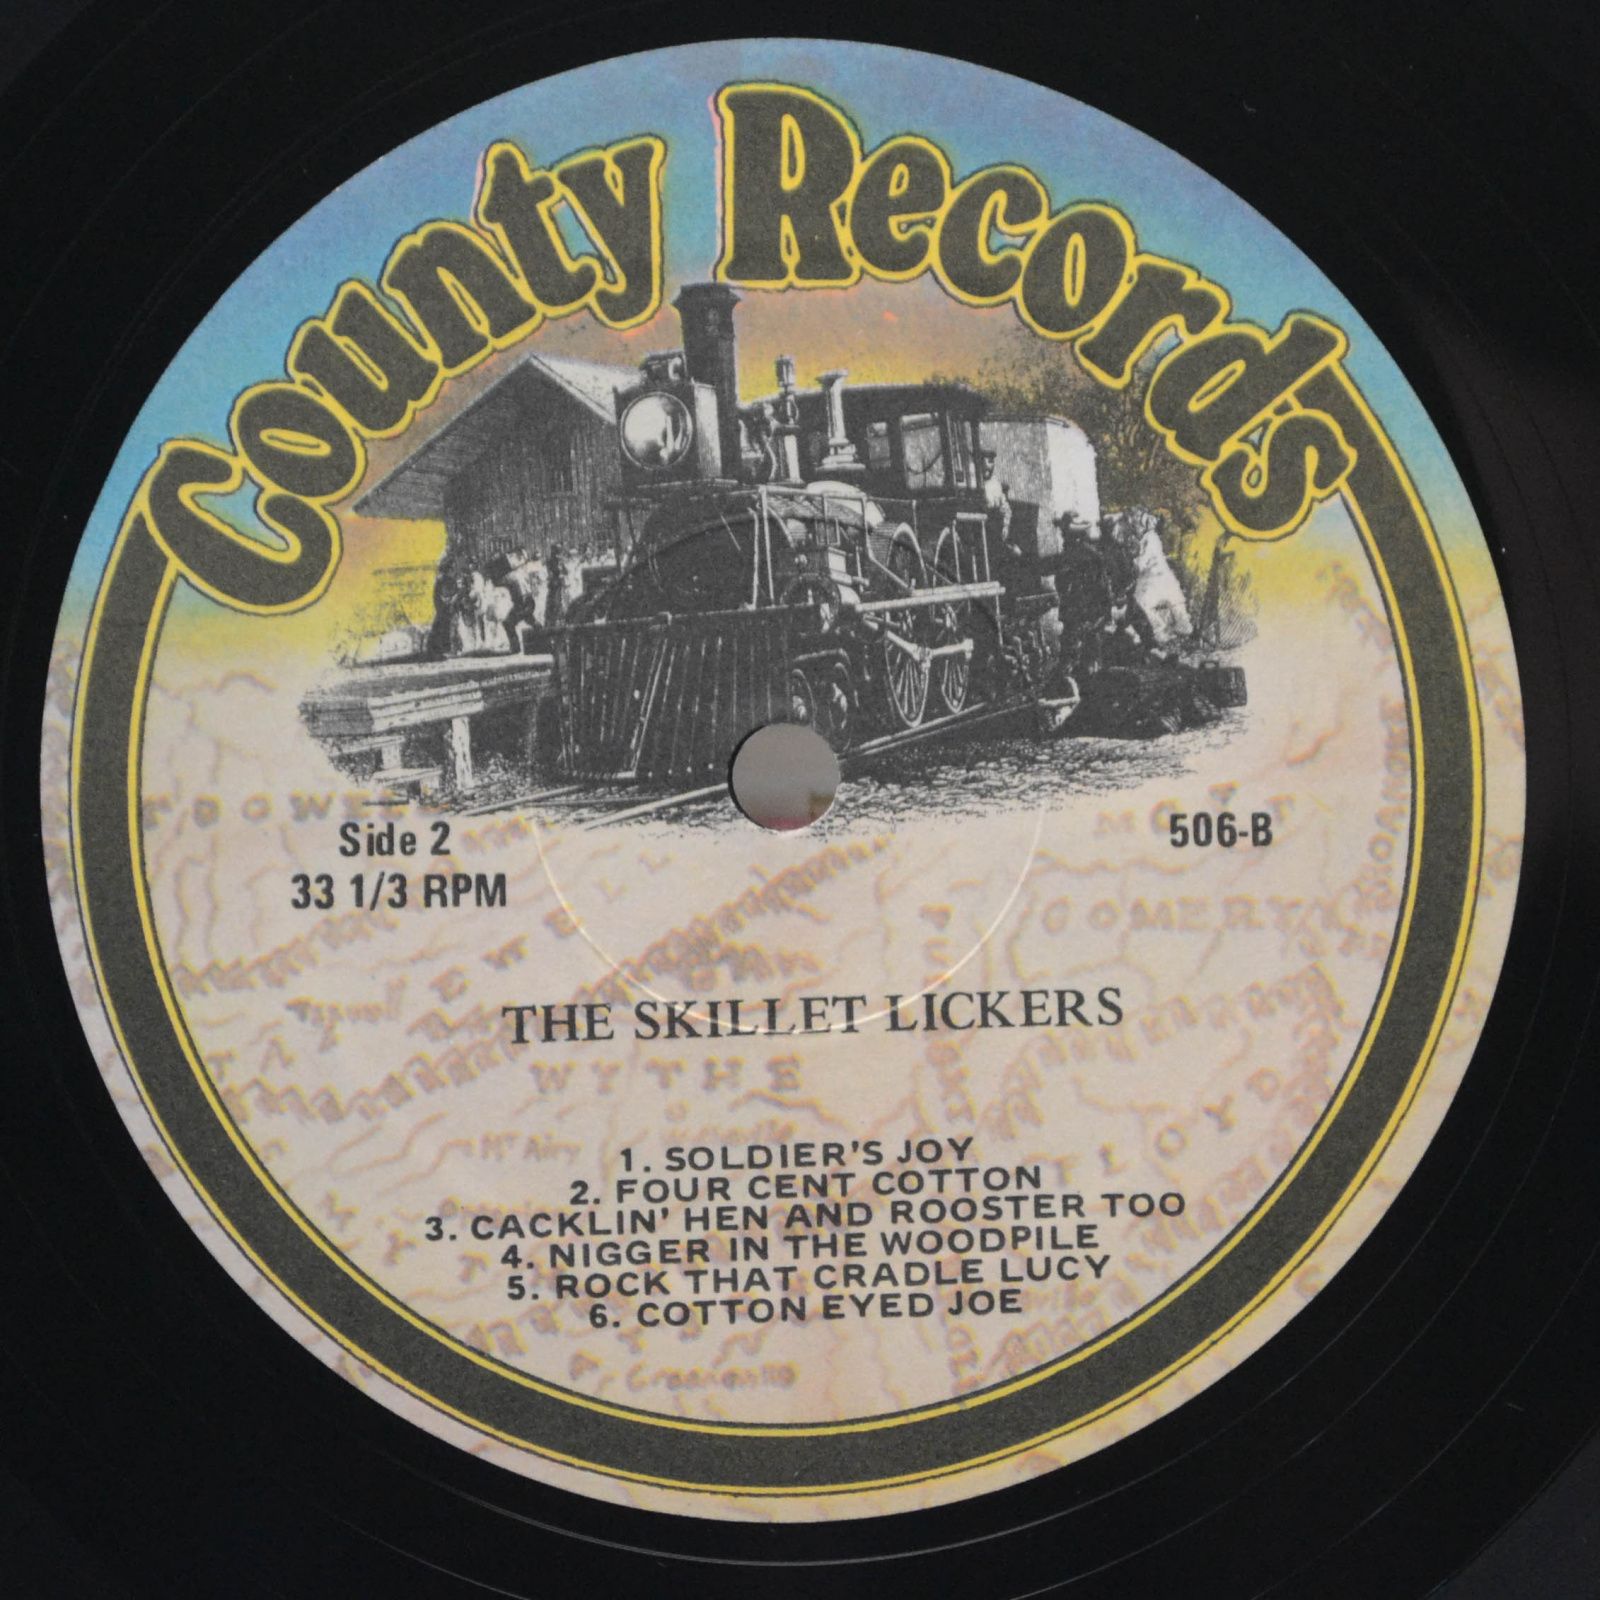 Skillet Lickers — Old Time Tunes Recorded 1927-1931, 1965